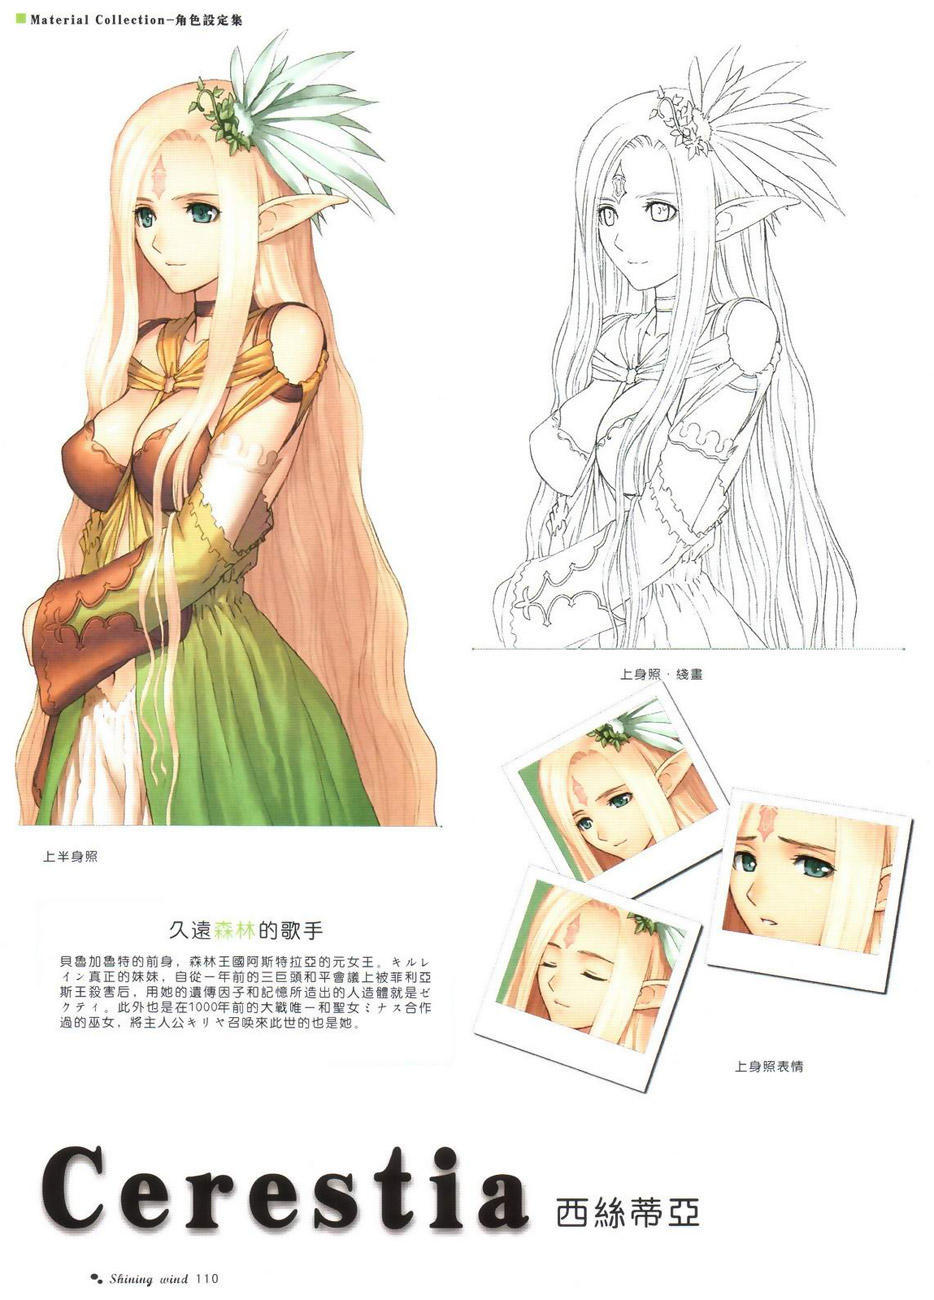 Shining Wind: Collection of visual materials image by Tony Taka